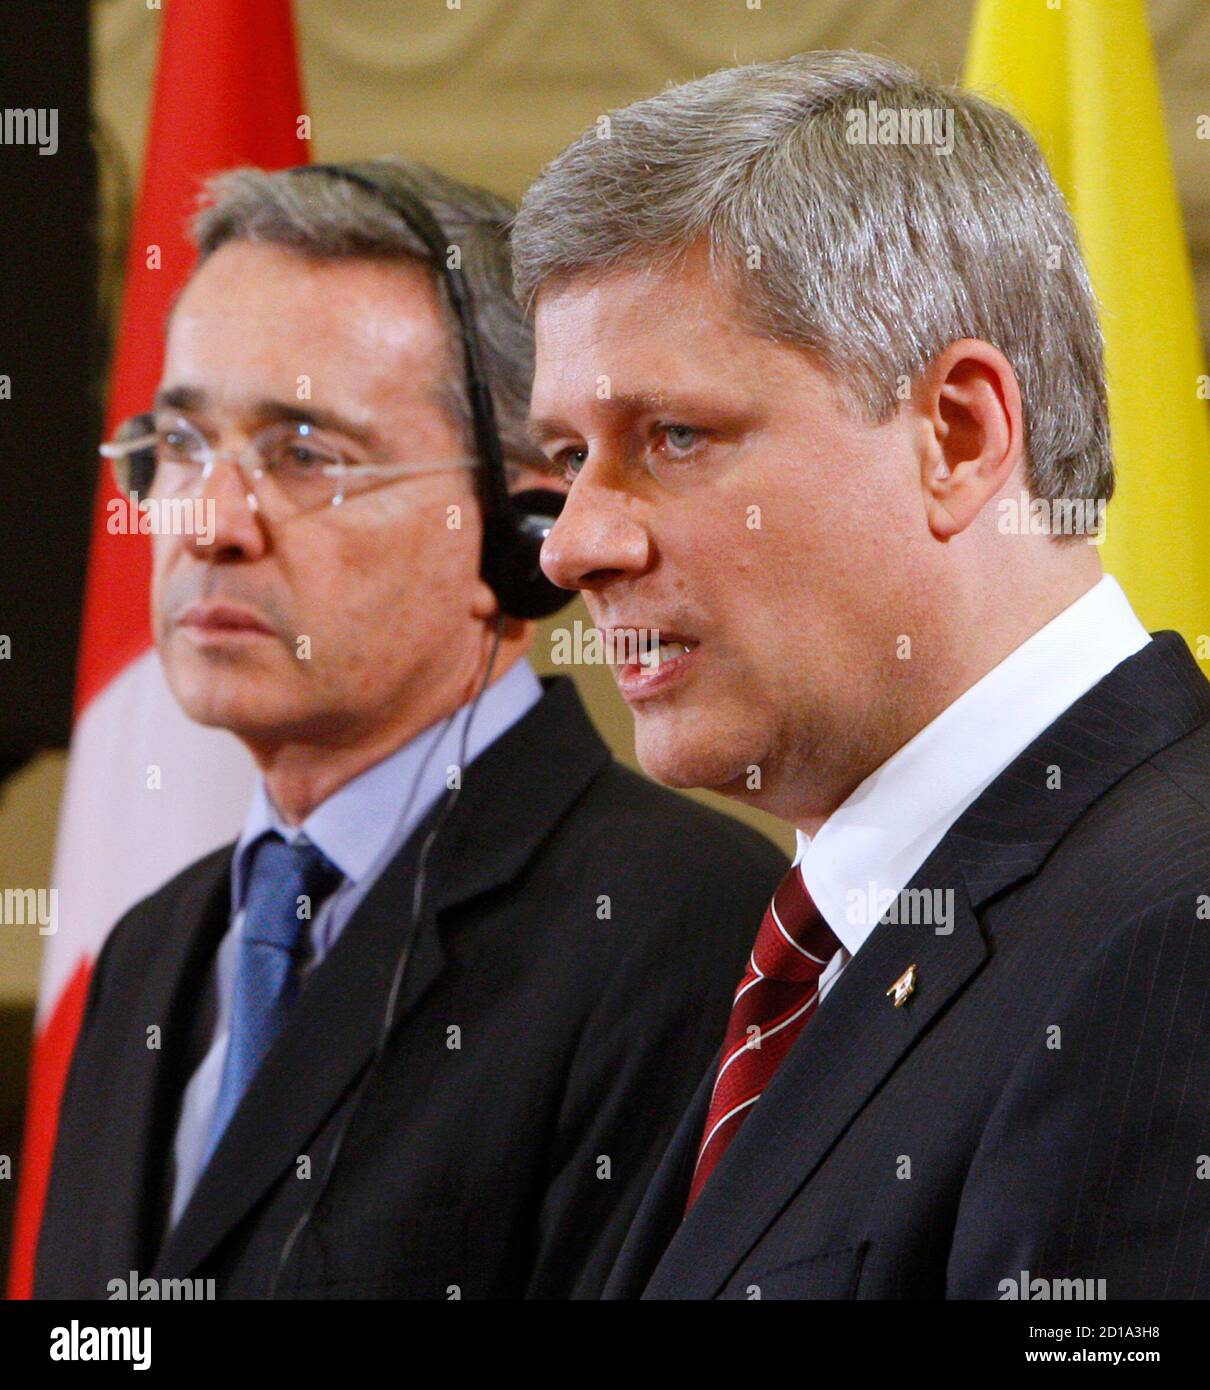 Canada's Prime Minister Stephen Harper (R) speaks during a news conference with Colombia's President Alvaro Uribe on Parliament Hill in Ottawa June 10, 2009.       REUTERS/Chris Wattie       (CANADA POLITICS) Stock Photo